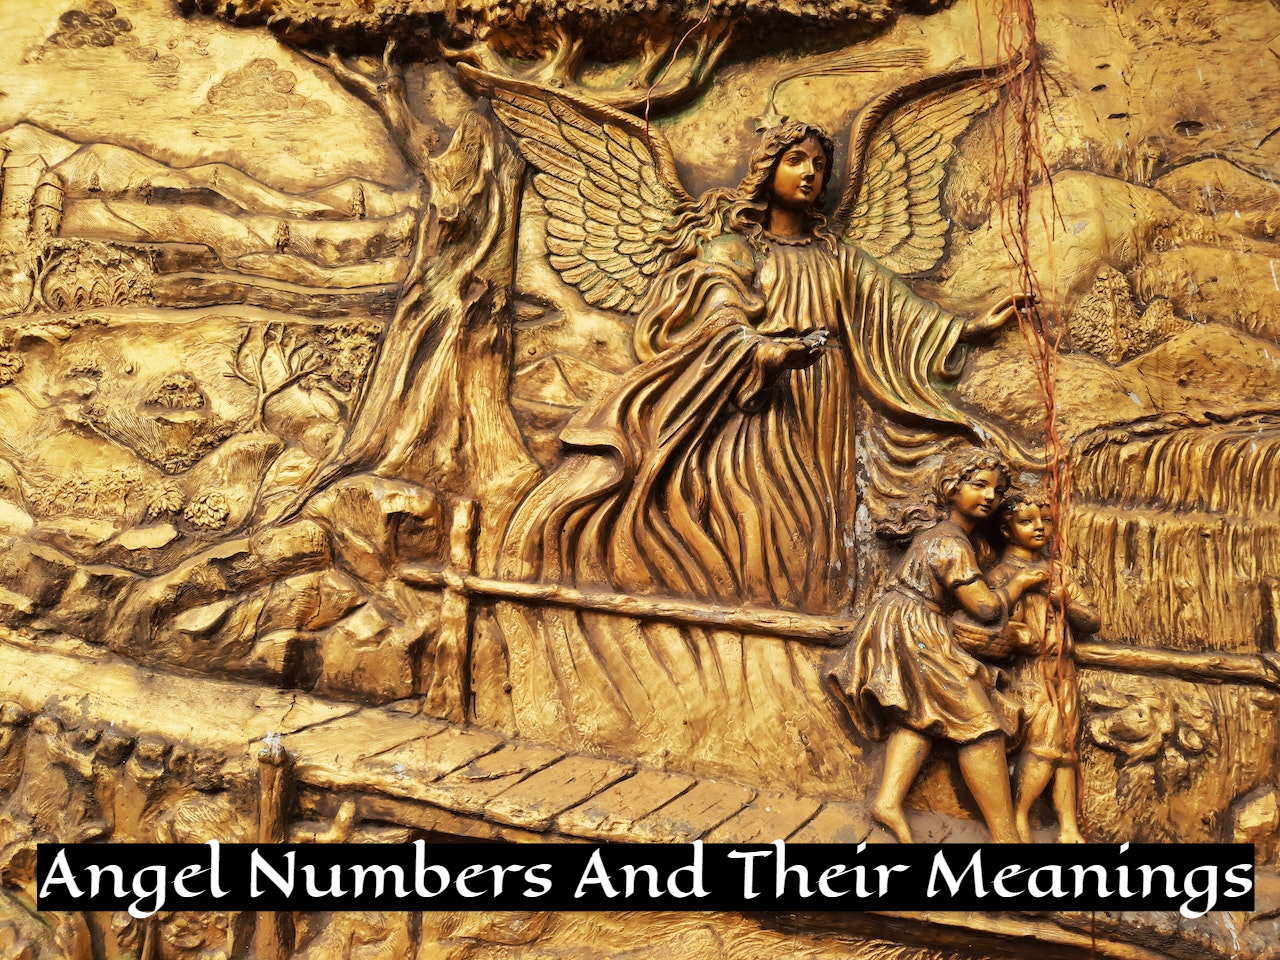 Angel Numbers And Their Meanings - A Definitive Guide